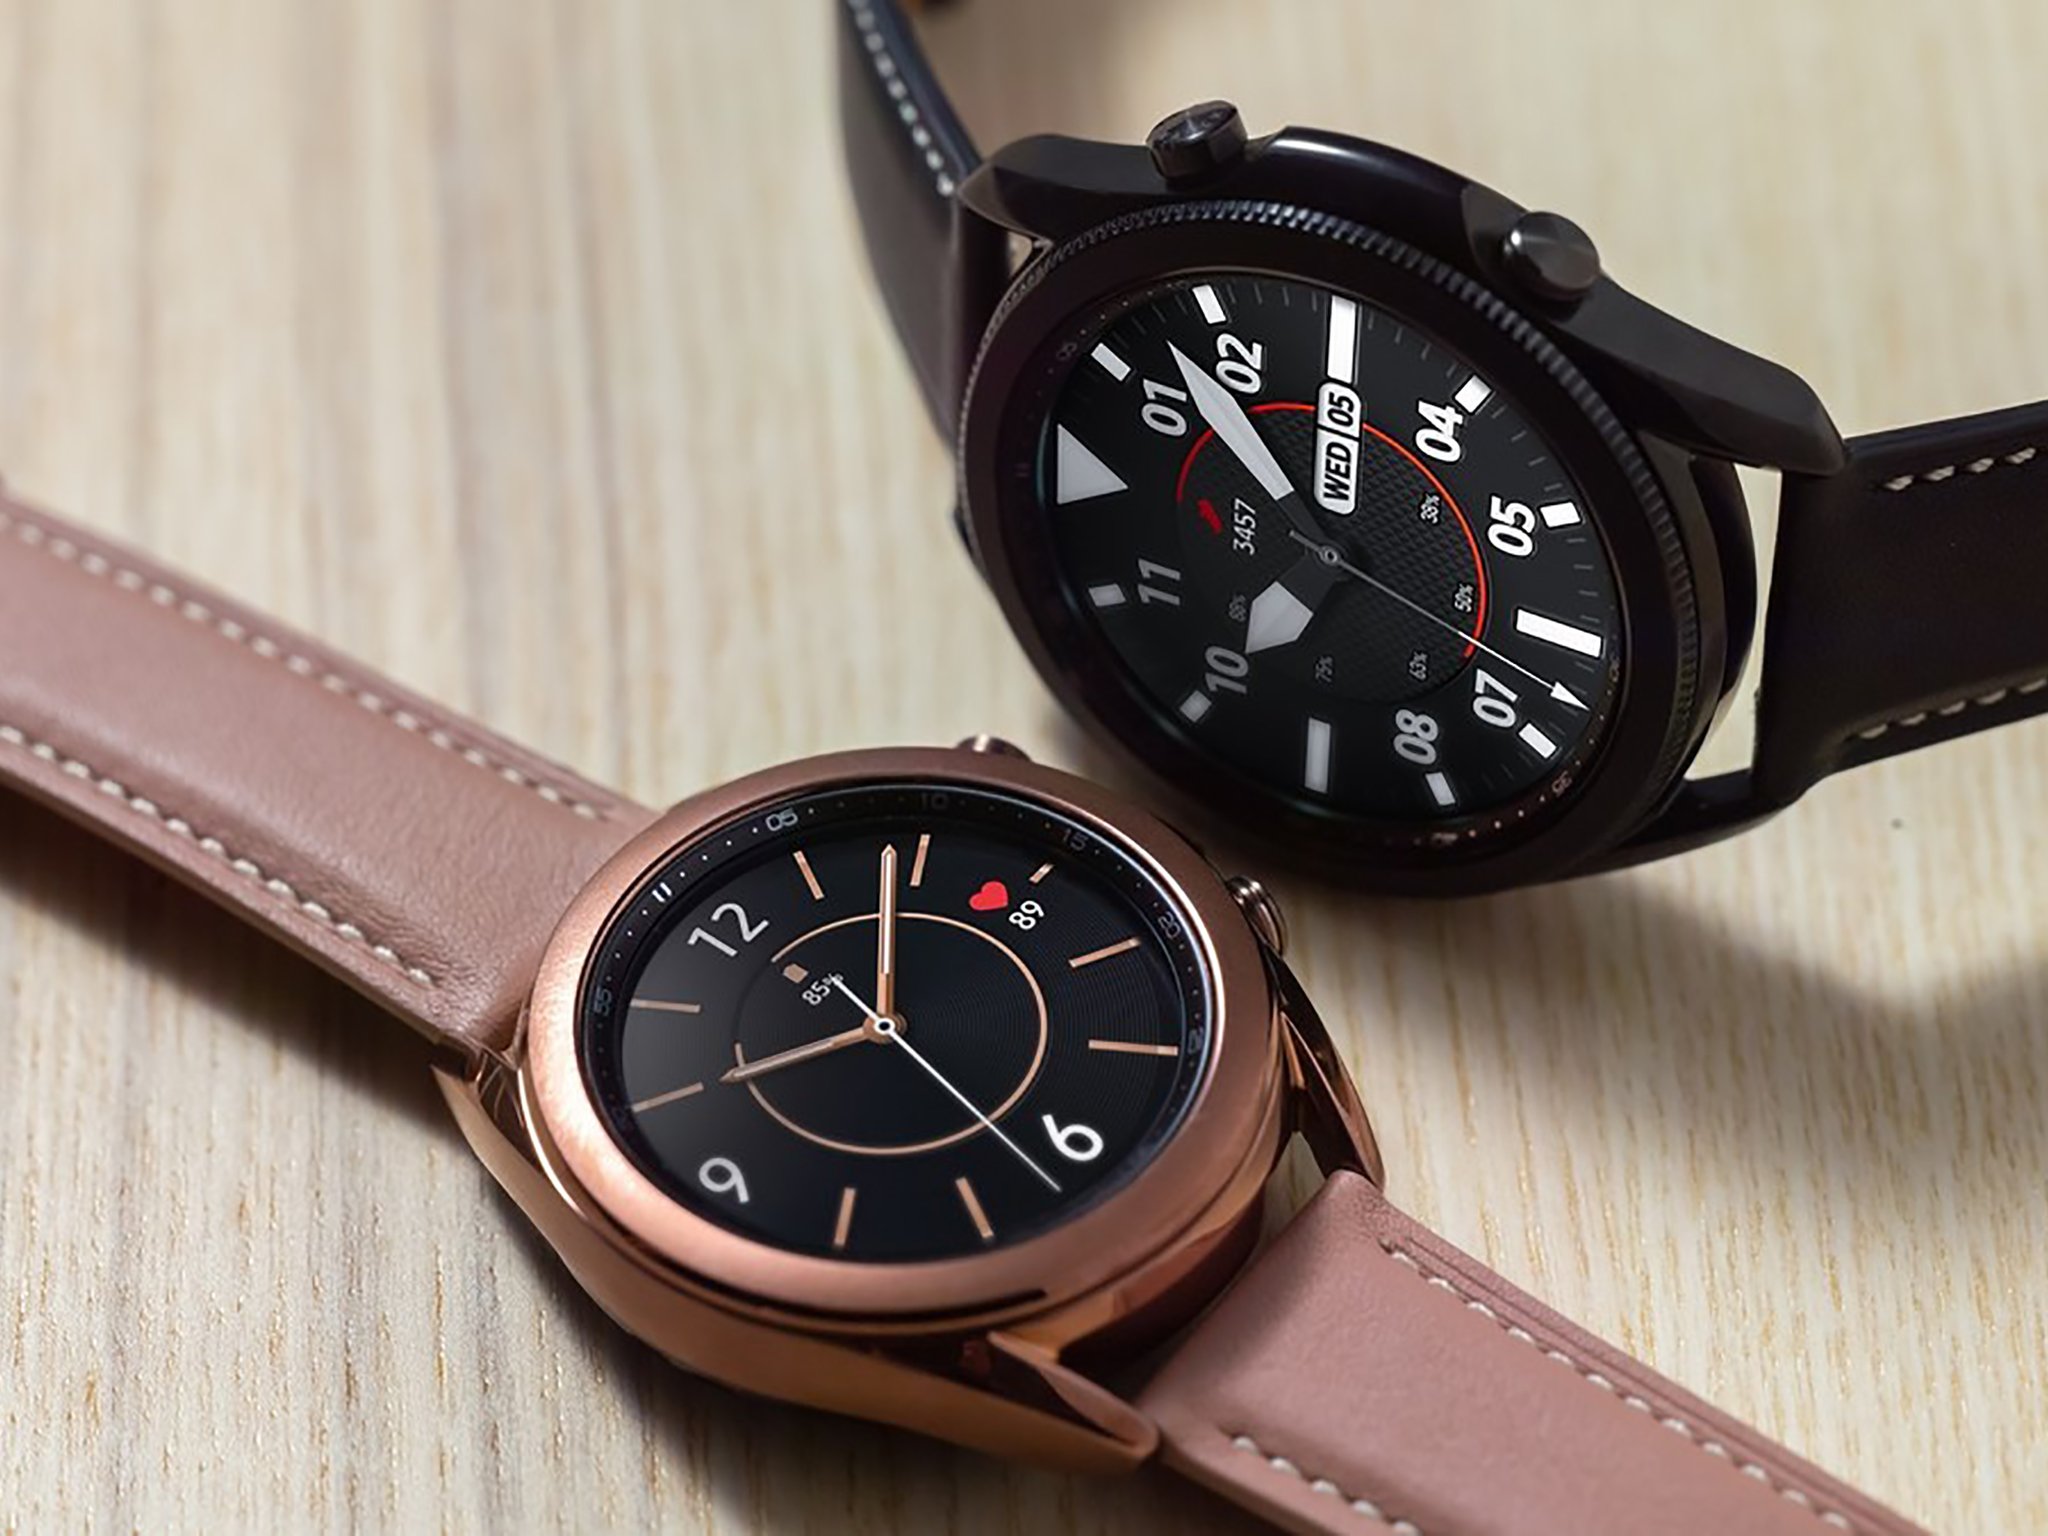 Samsung unveils Exynos chipset powering the Galaxy Watch 4 � and it is insane